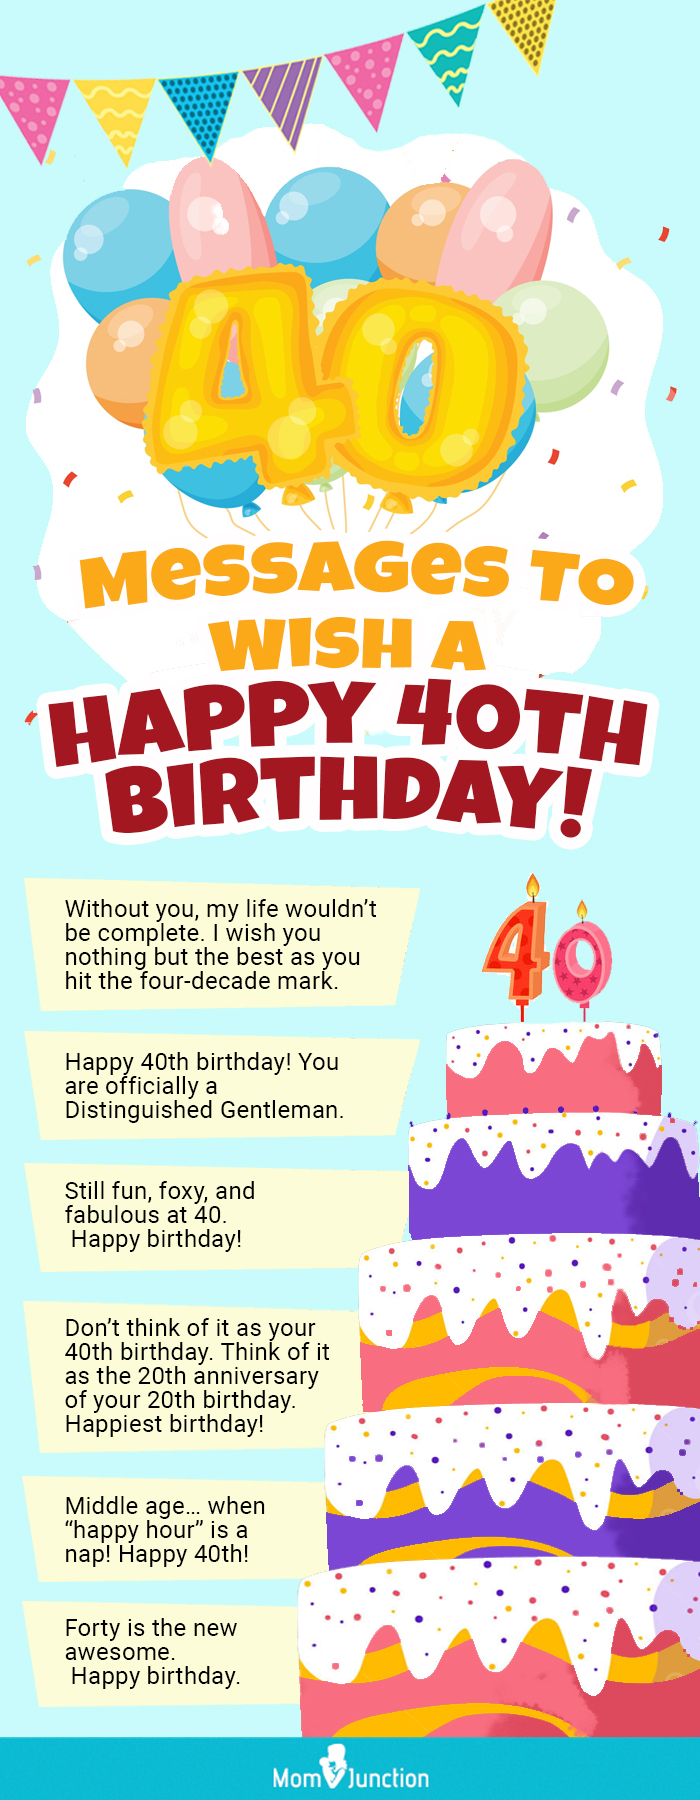 messages to wish a happy 40th birthday (infographic)